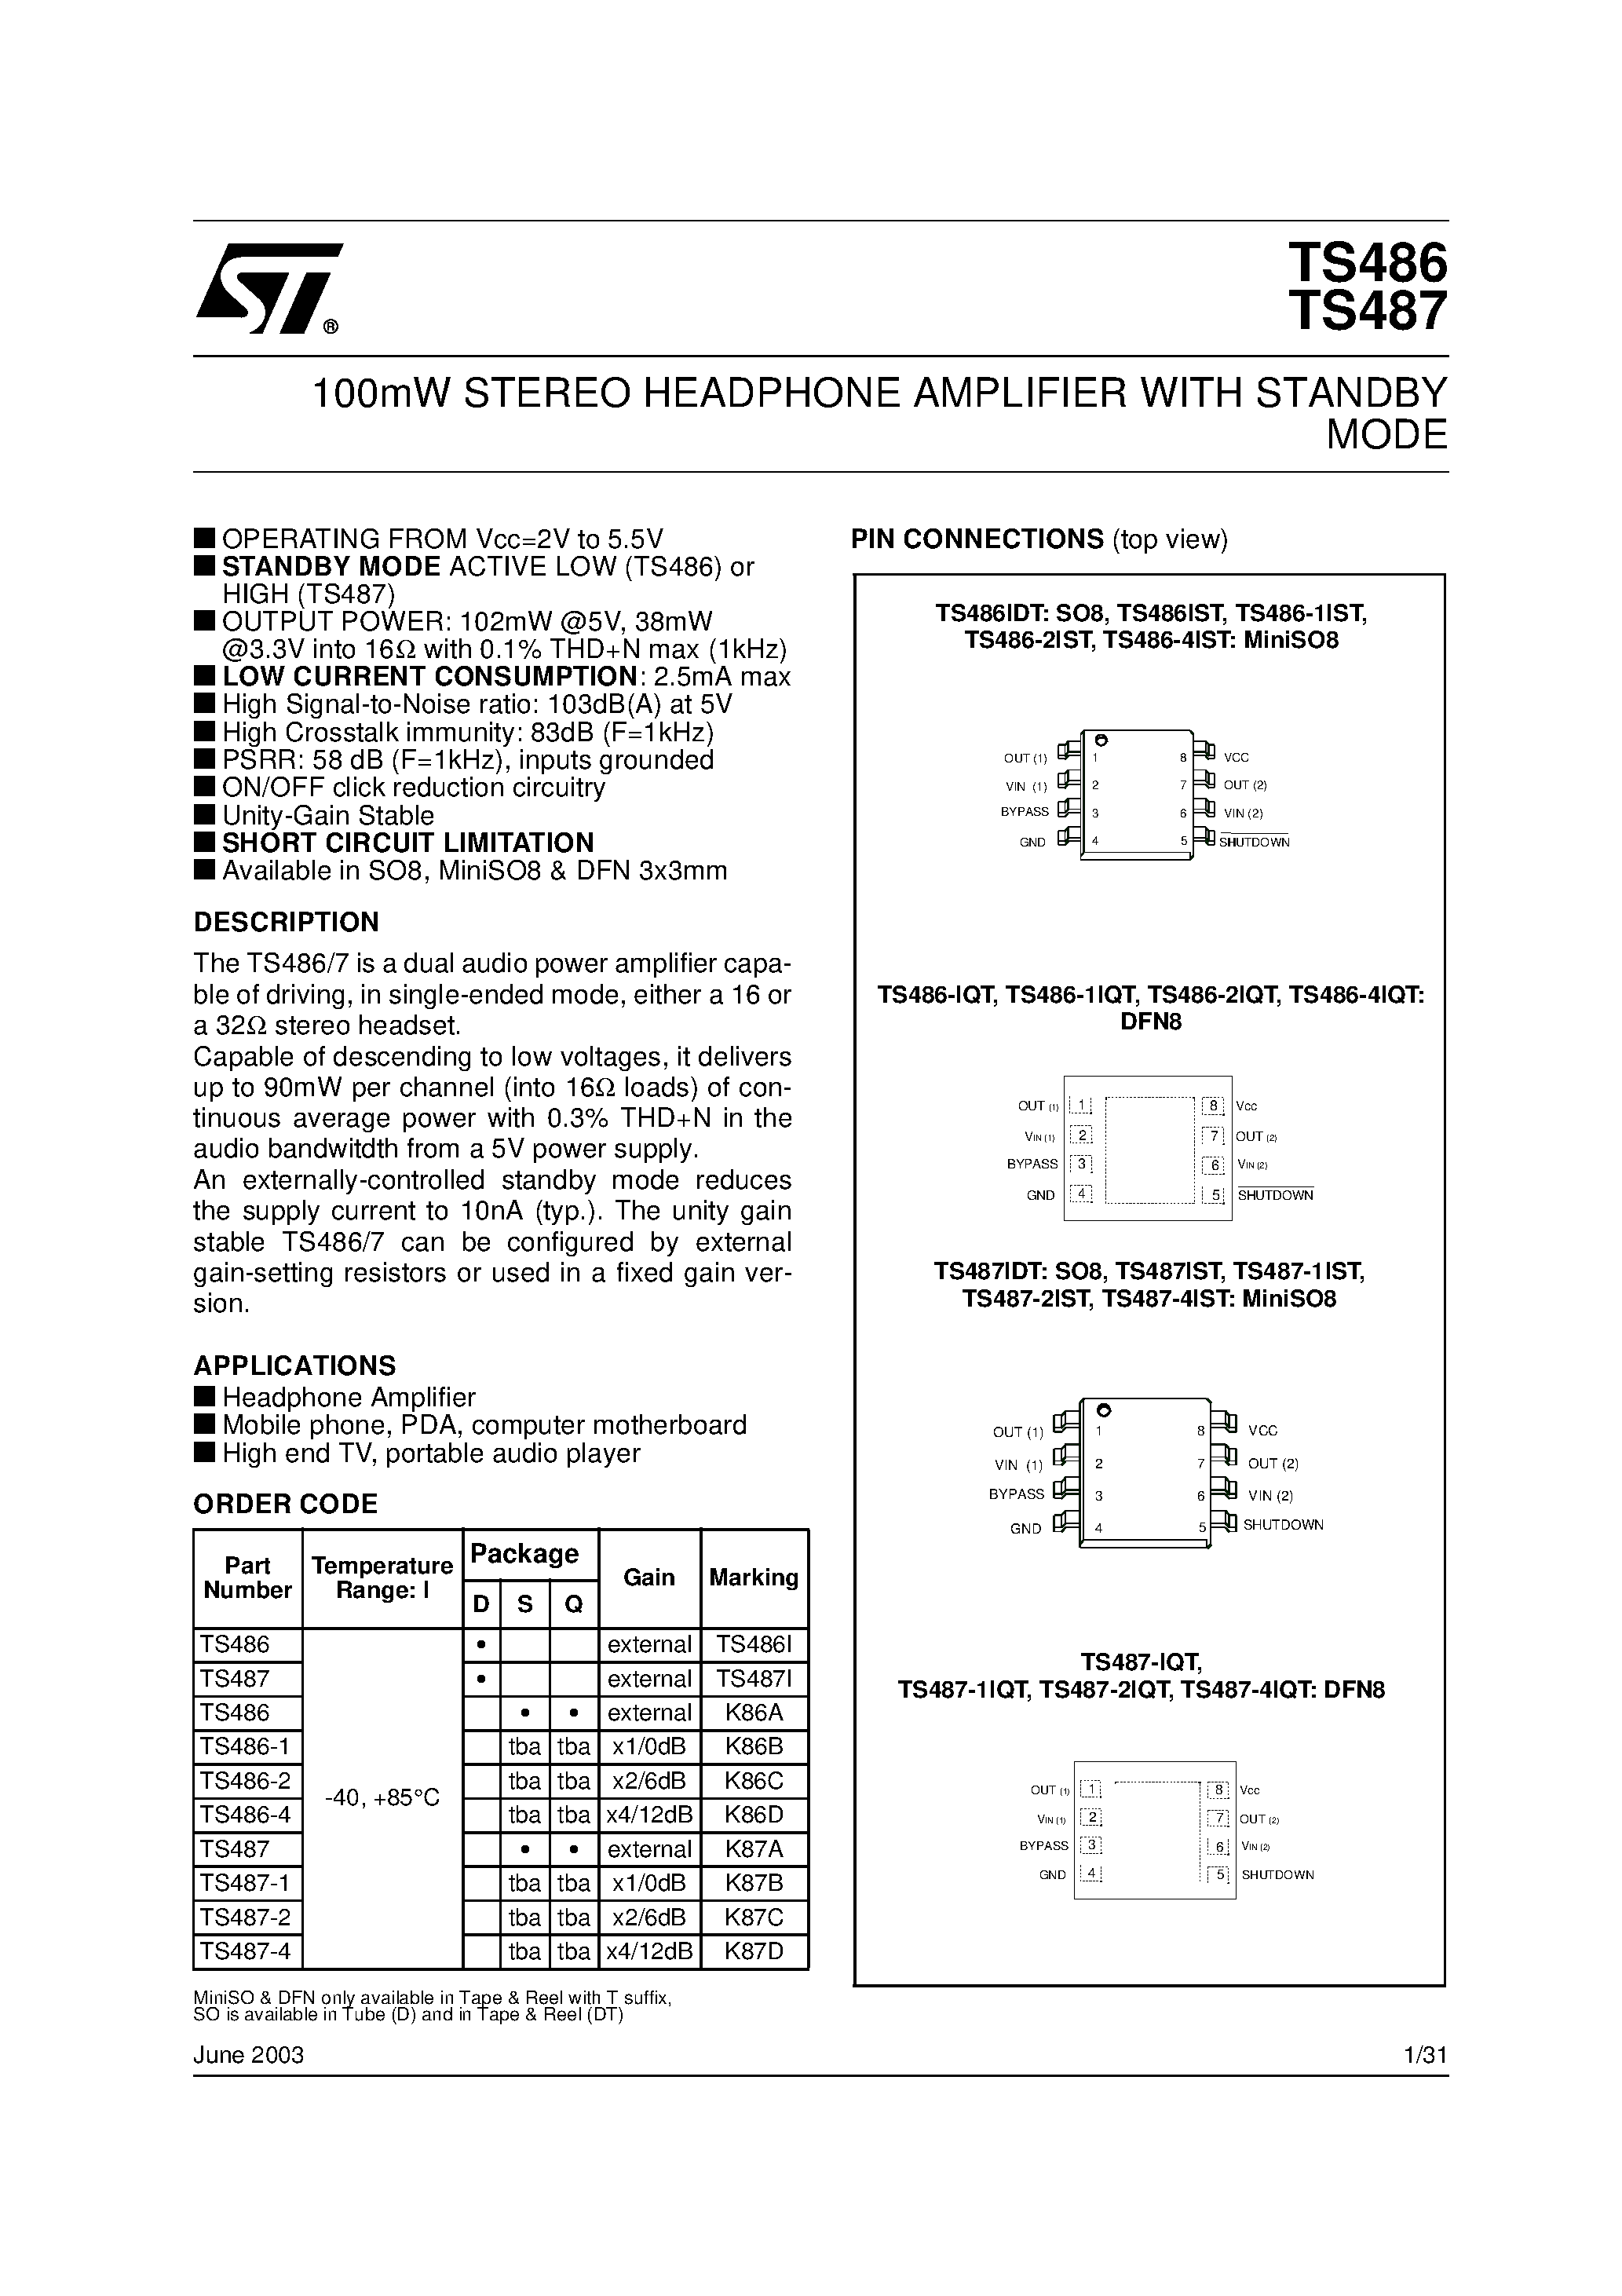 Datasheet TS487-1 - 100mW STEREO HEADPHONE AMPLIFIER WITH STANDBY MODE page 1